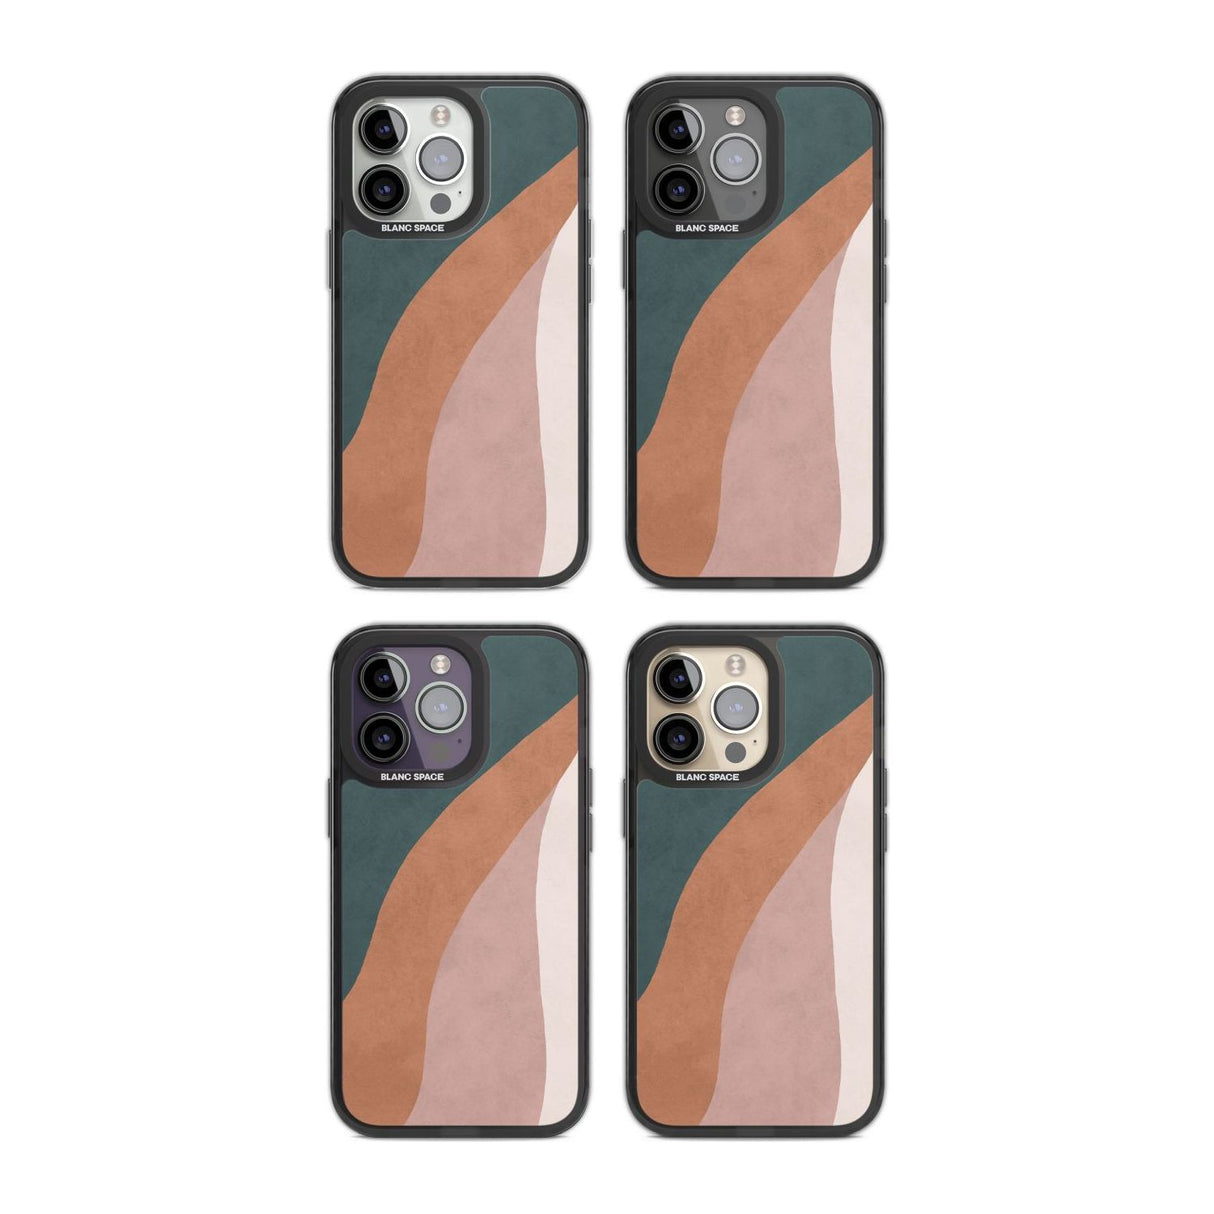 Lush Abstract Watercolour: Design #7 Phone Case iPhone 15 Pro Max / Black Impact Case,iPhone 15 Plus / Black Impact Case,iPhone 15 Pro / Black Impact Case,iPhone 15 / Black Impact Case,iPhone 15 Pro Max / Impact Case,iPhone 15 Plus / Impact Case,iPhone 15 Pro / Impact Case,iPhone 15 / Impact Case,iPhone 15 Pro Max / Magsafe Black Impact Case,iPhone 15 Plus / Magsafe Black Impact Case,iPhone 15 Pro / Magsafe Black Impact Case,iPhone 15 / Magsafe Black Impact Case,iPhone 14 Pro Max / Black Impact Case,iPhone 